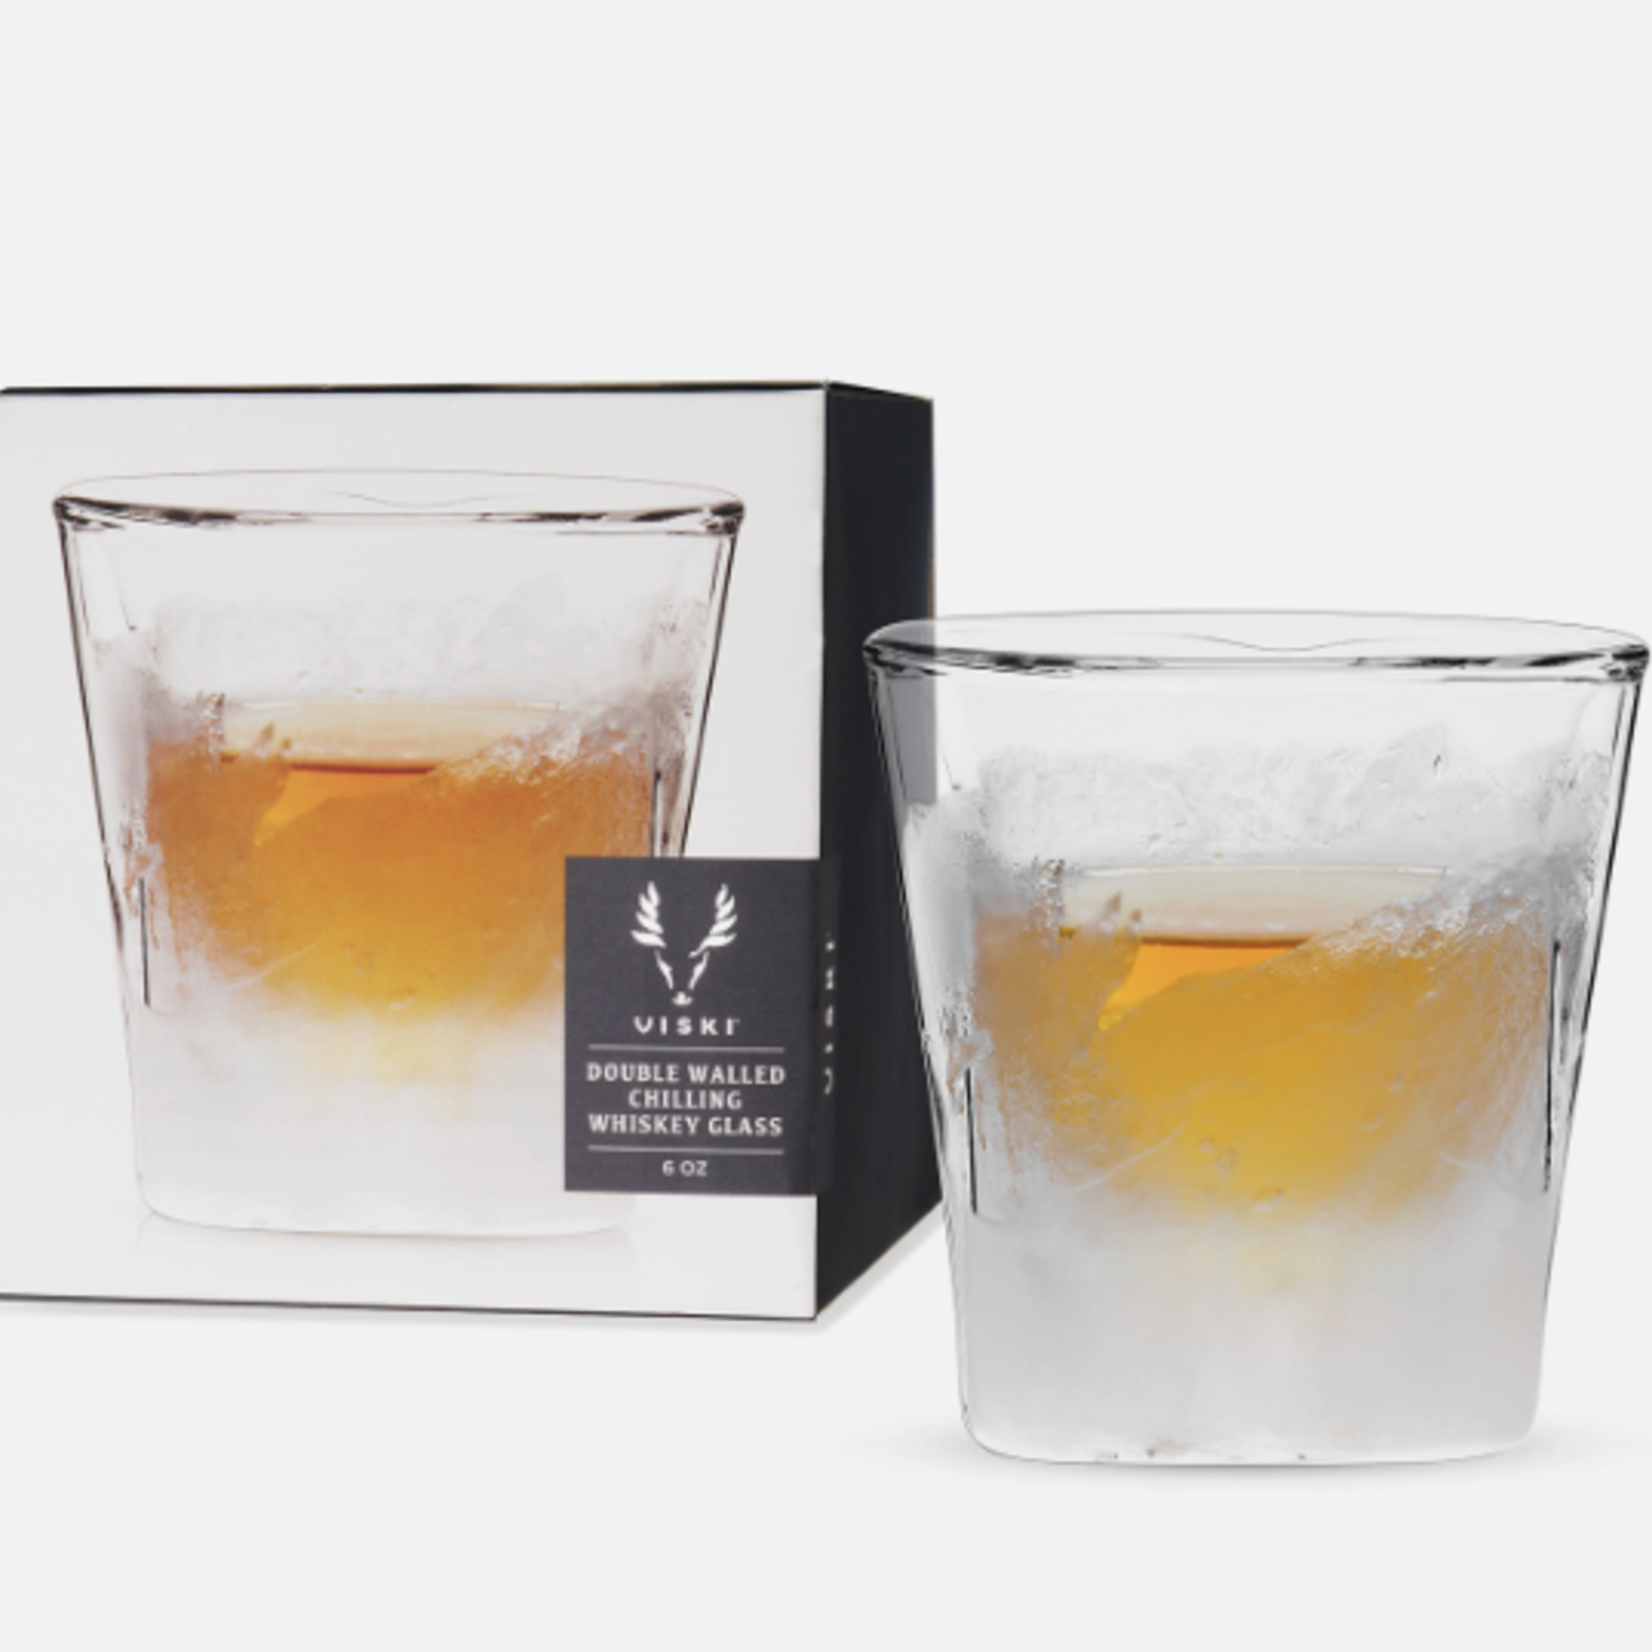 True Fabrications Glacier Double-Walled Whiskey Glass